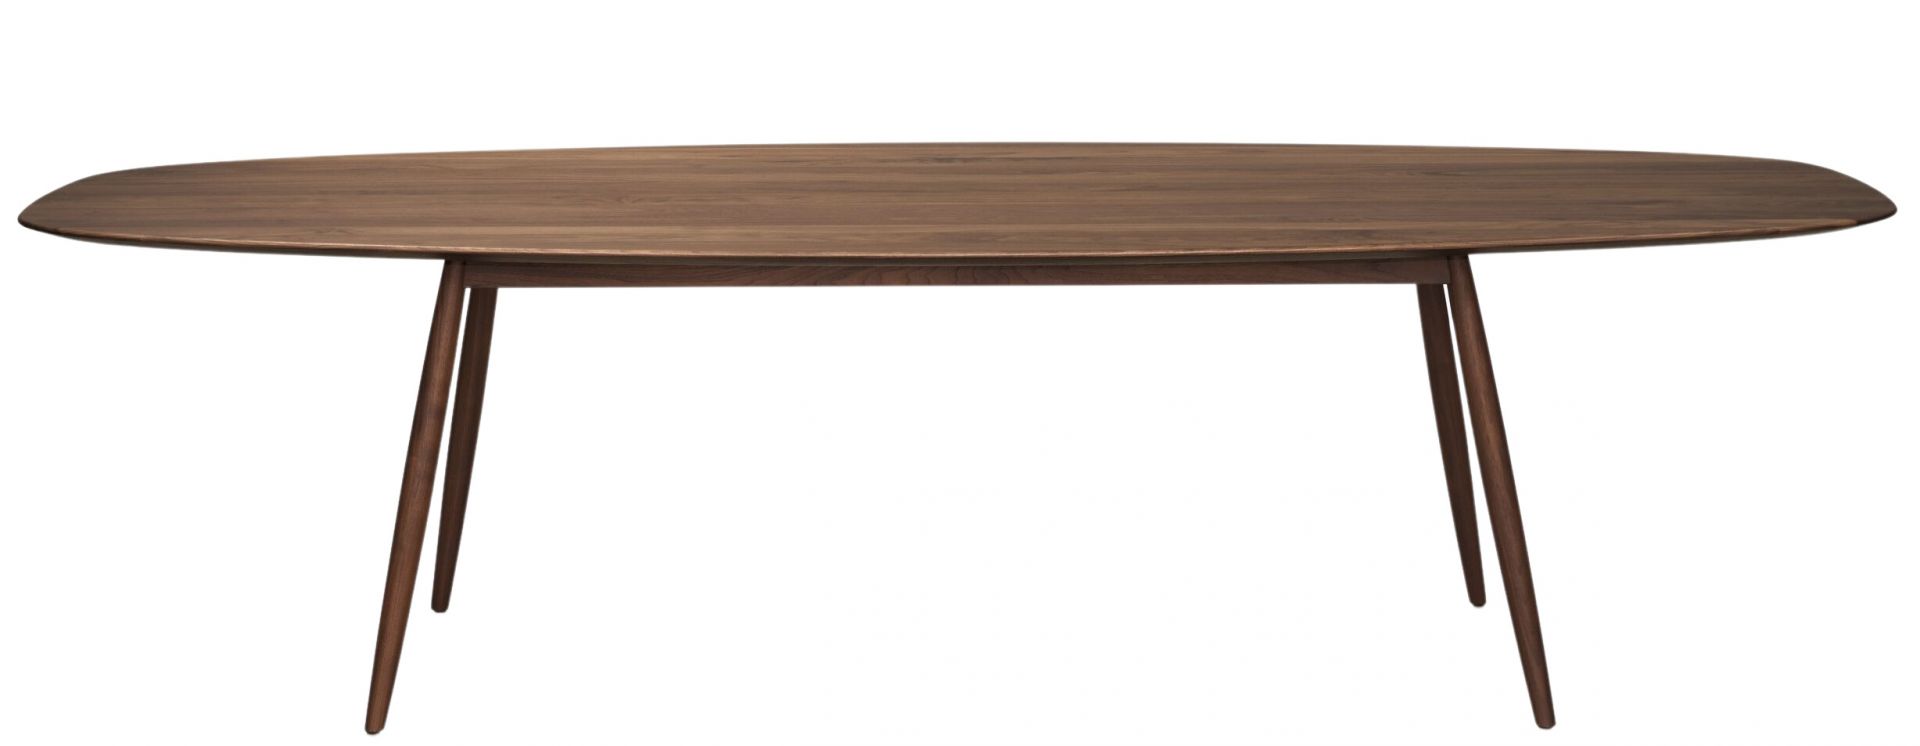 2990 Moualla Table Dining Table Walter Knoll